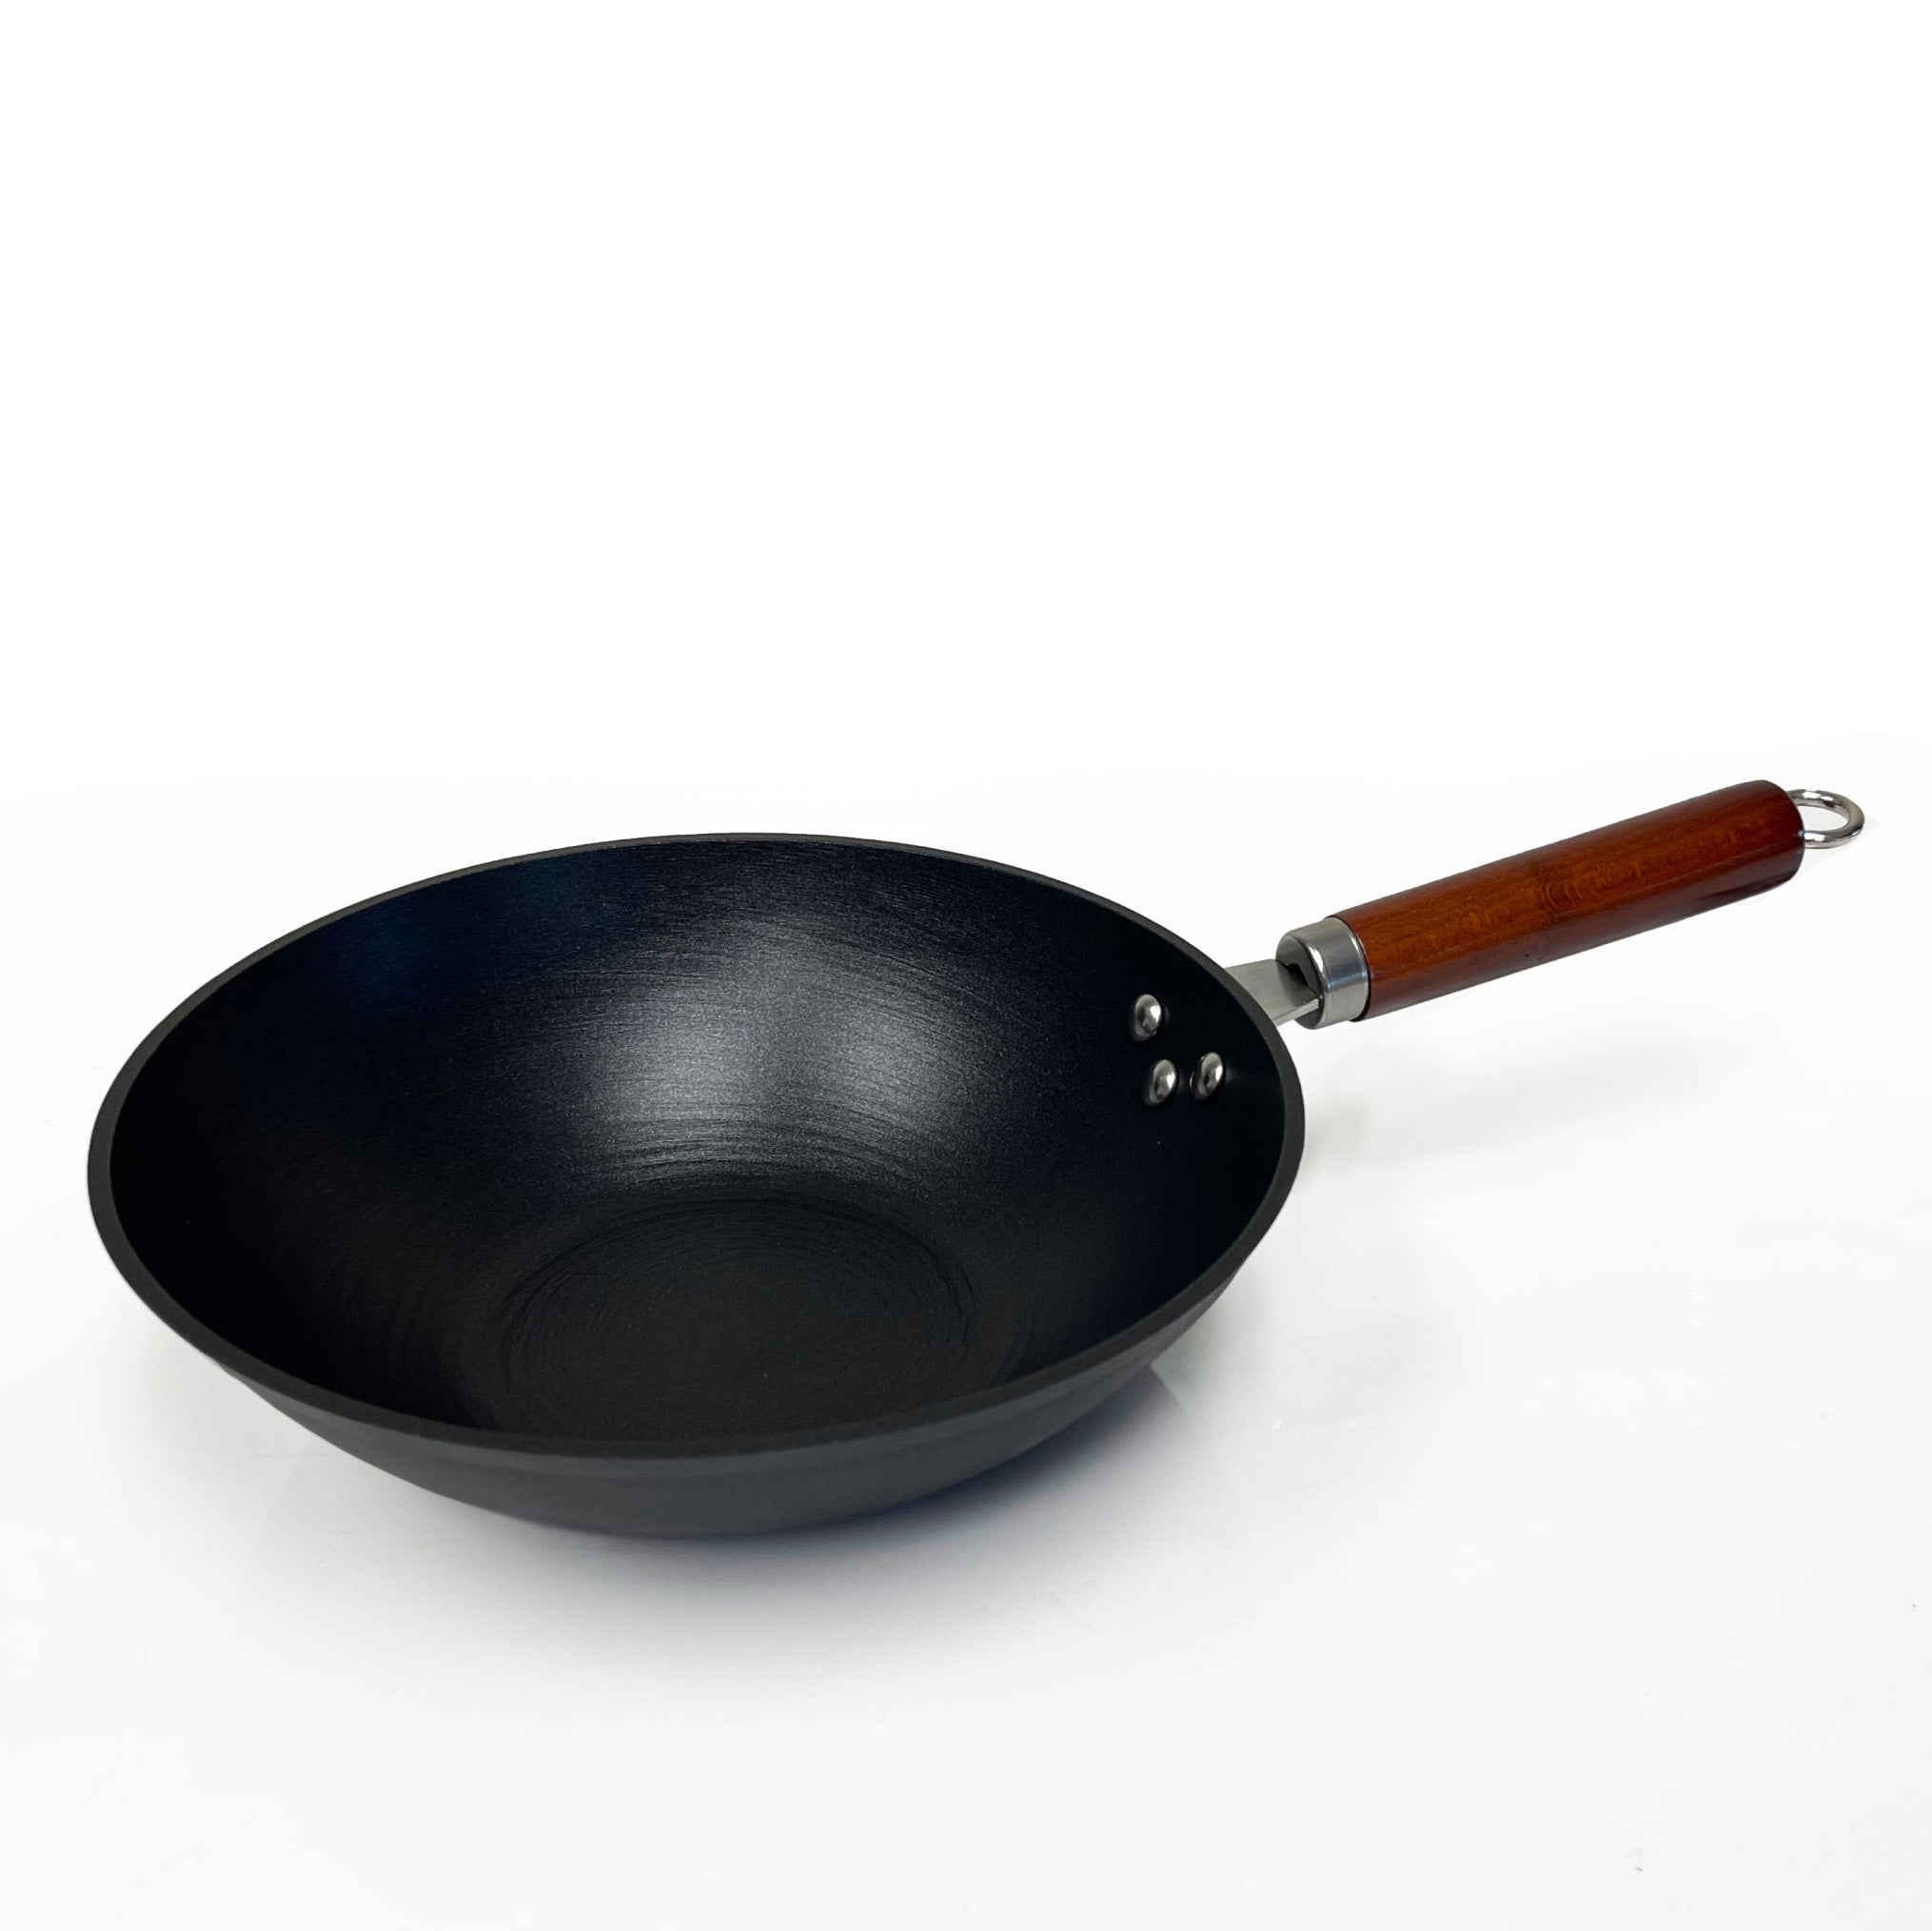 14 inch Lightweight Cast Iron Wok with Glass Lid Stir Fry Pan Wooden Handle Chef’s Pan Pre-Seasoned Nonstick for Chinese Japanese and Other Cooking